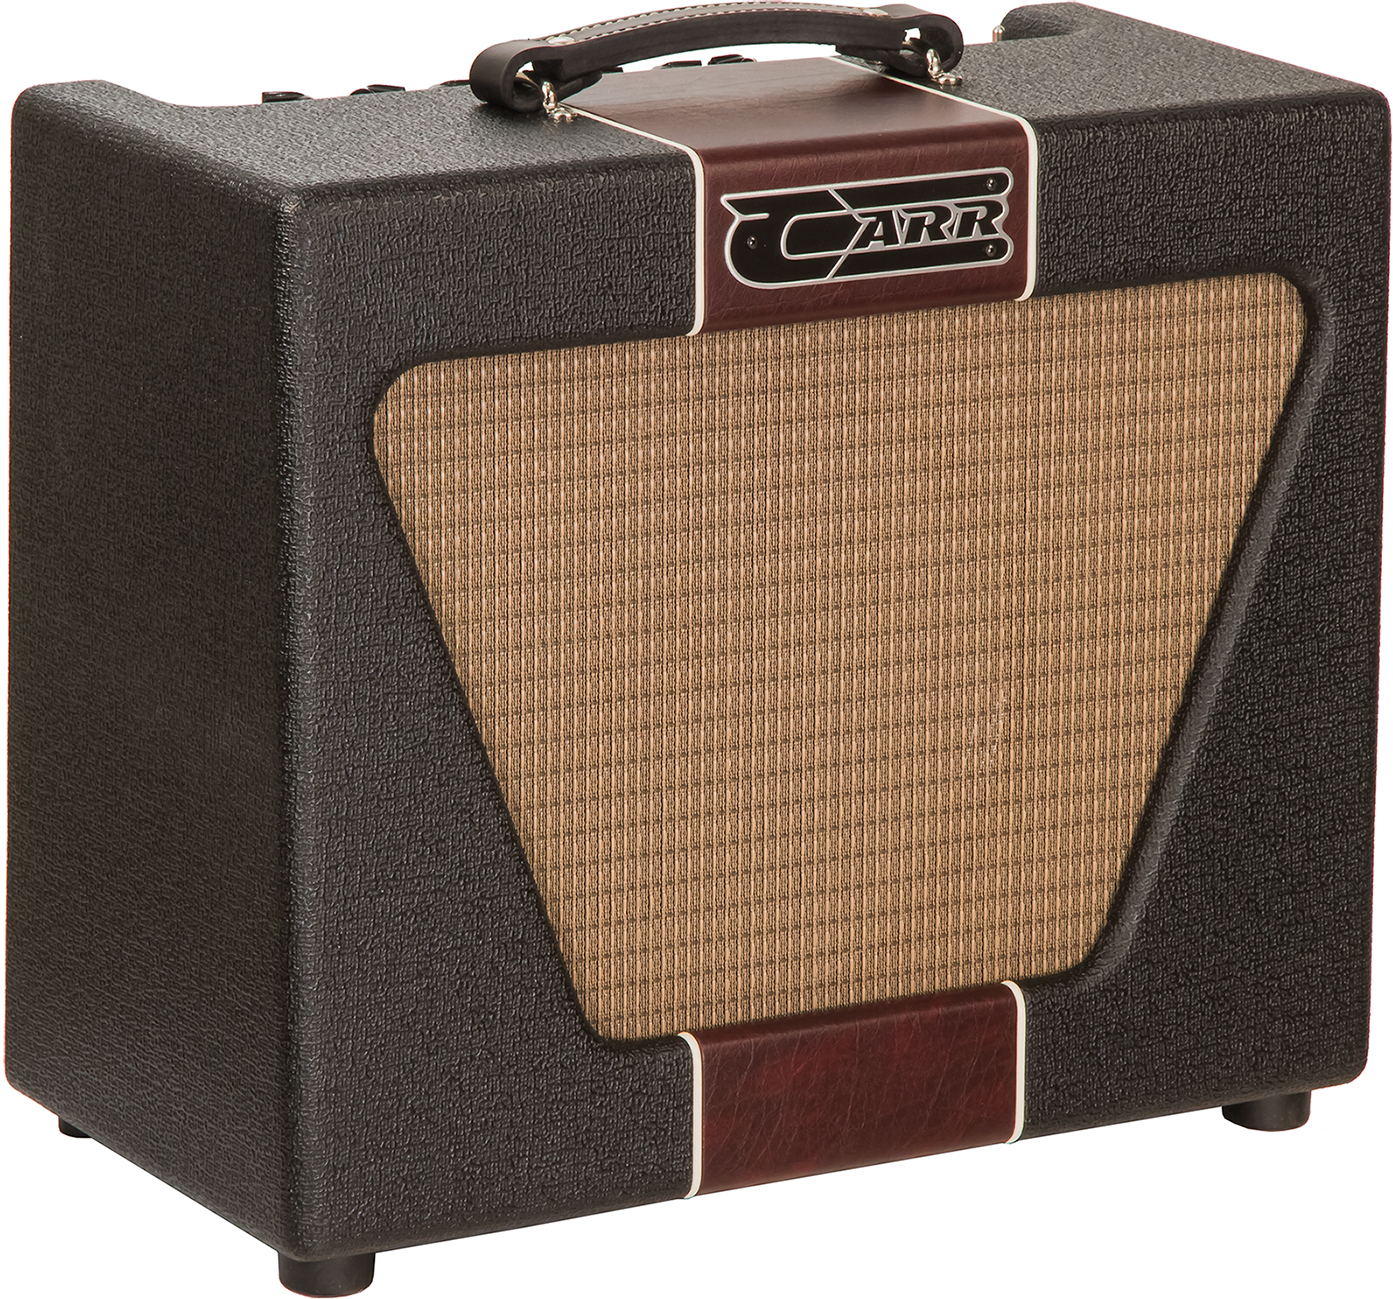 Carr Amplifiers Super Bee 1-12 Combo 10w 1x12 Black/wine - Electric guitar combo amp - Main picture